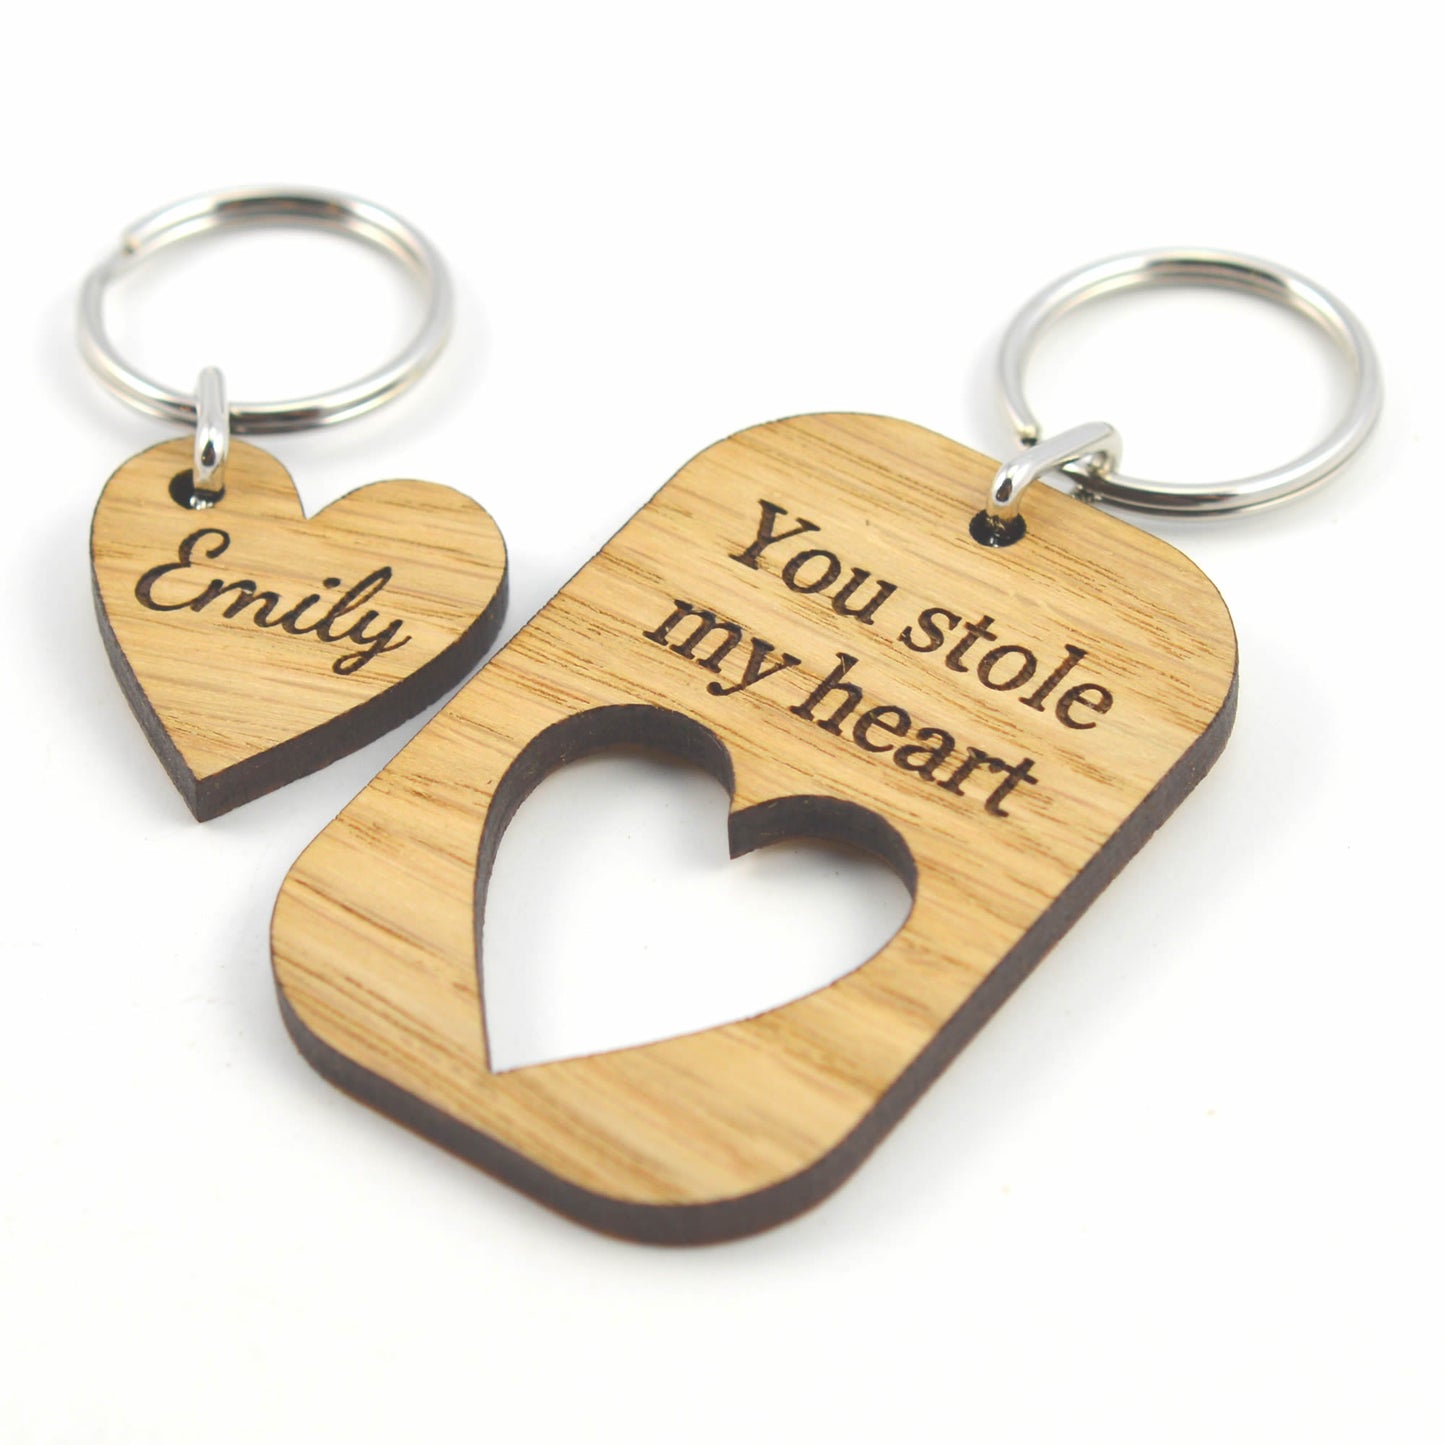 YOU Stole My HEART - Valentines Day Keyring Set Gift